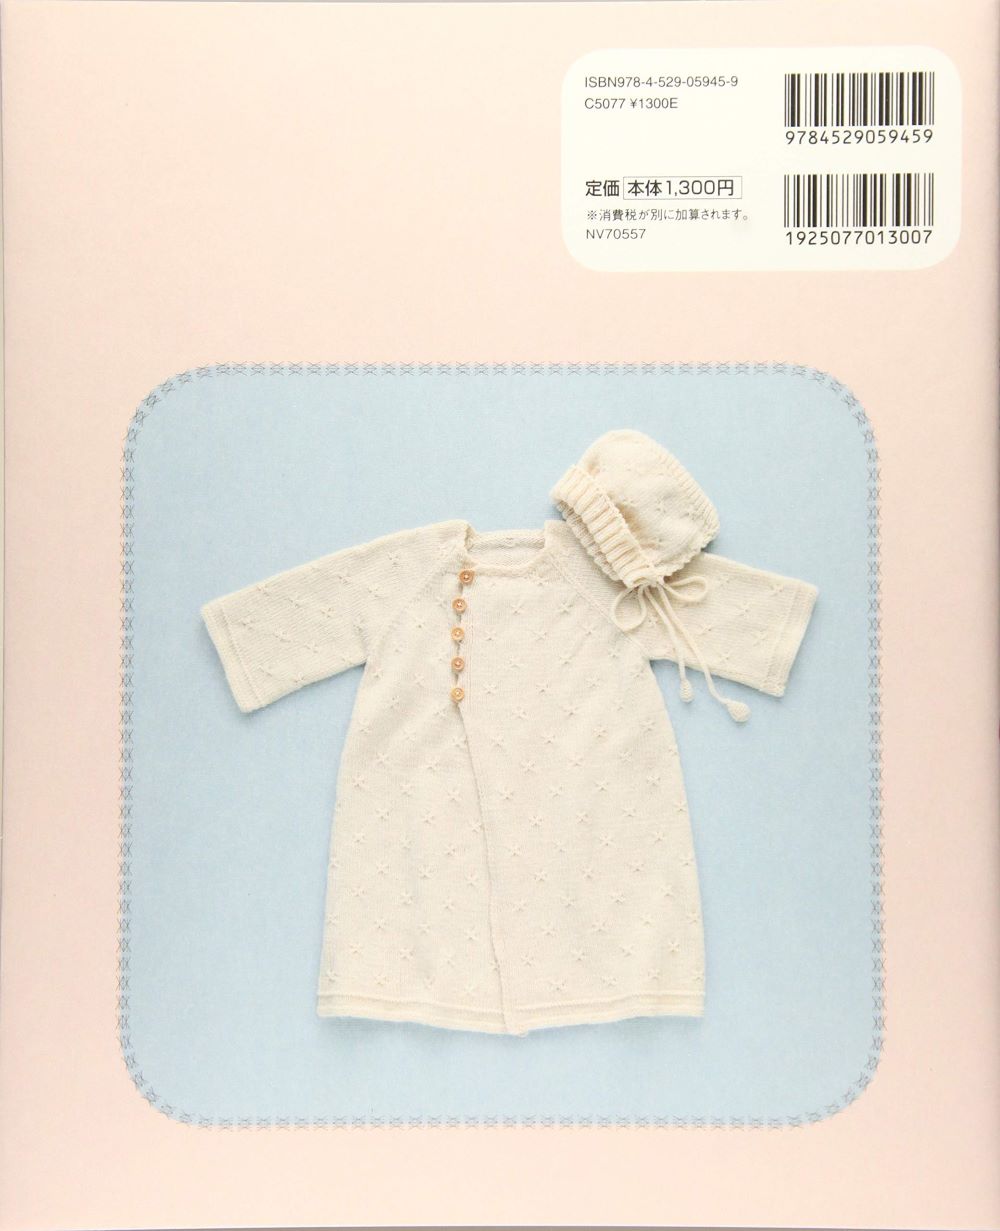 New edition Baby knit worn all year round